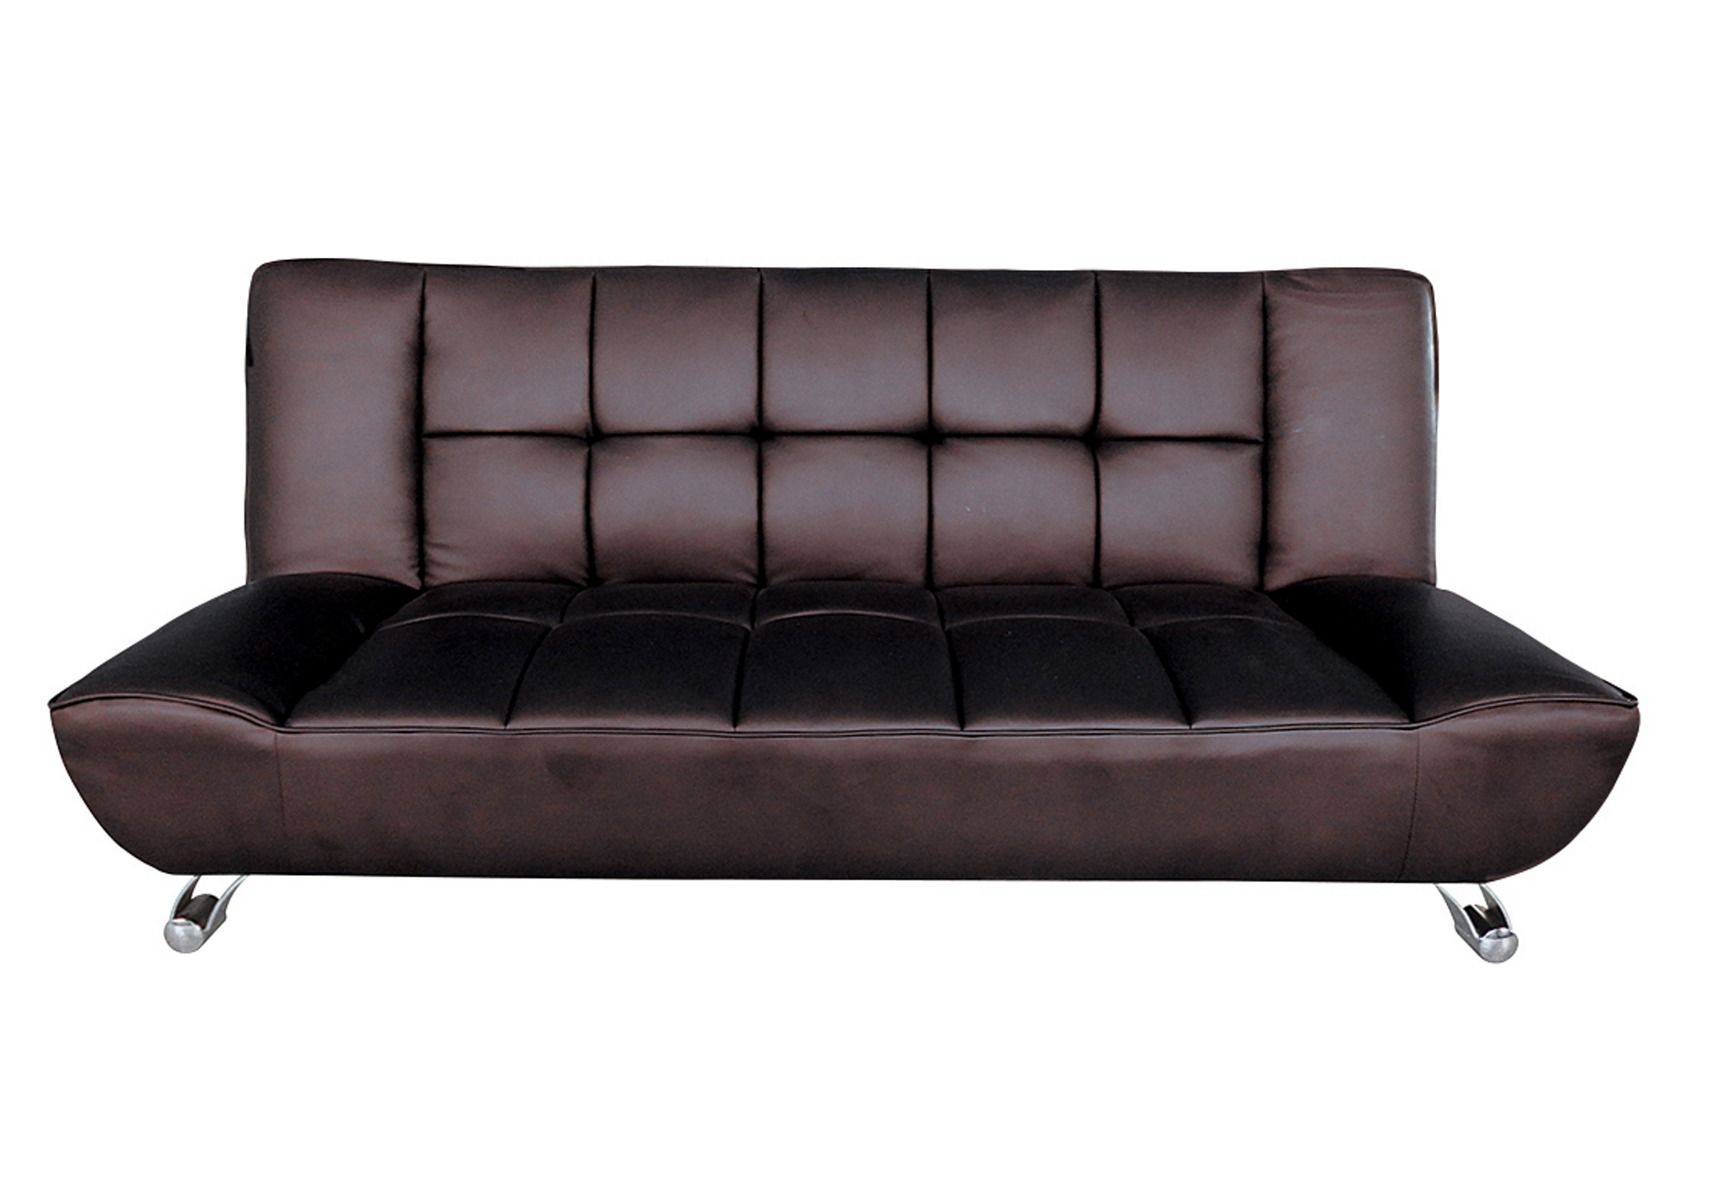 Lpd Vogue Brown Faux Leather Sofa Bed, Brown Faux Leather Couch